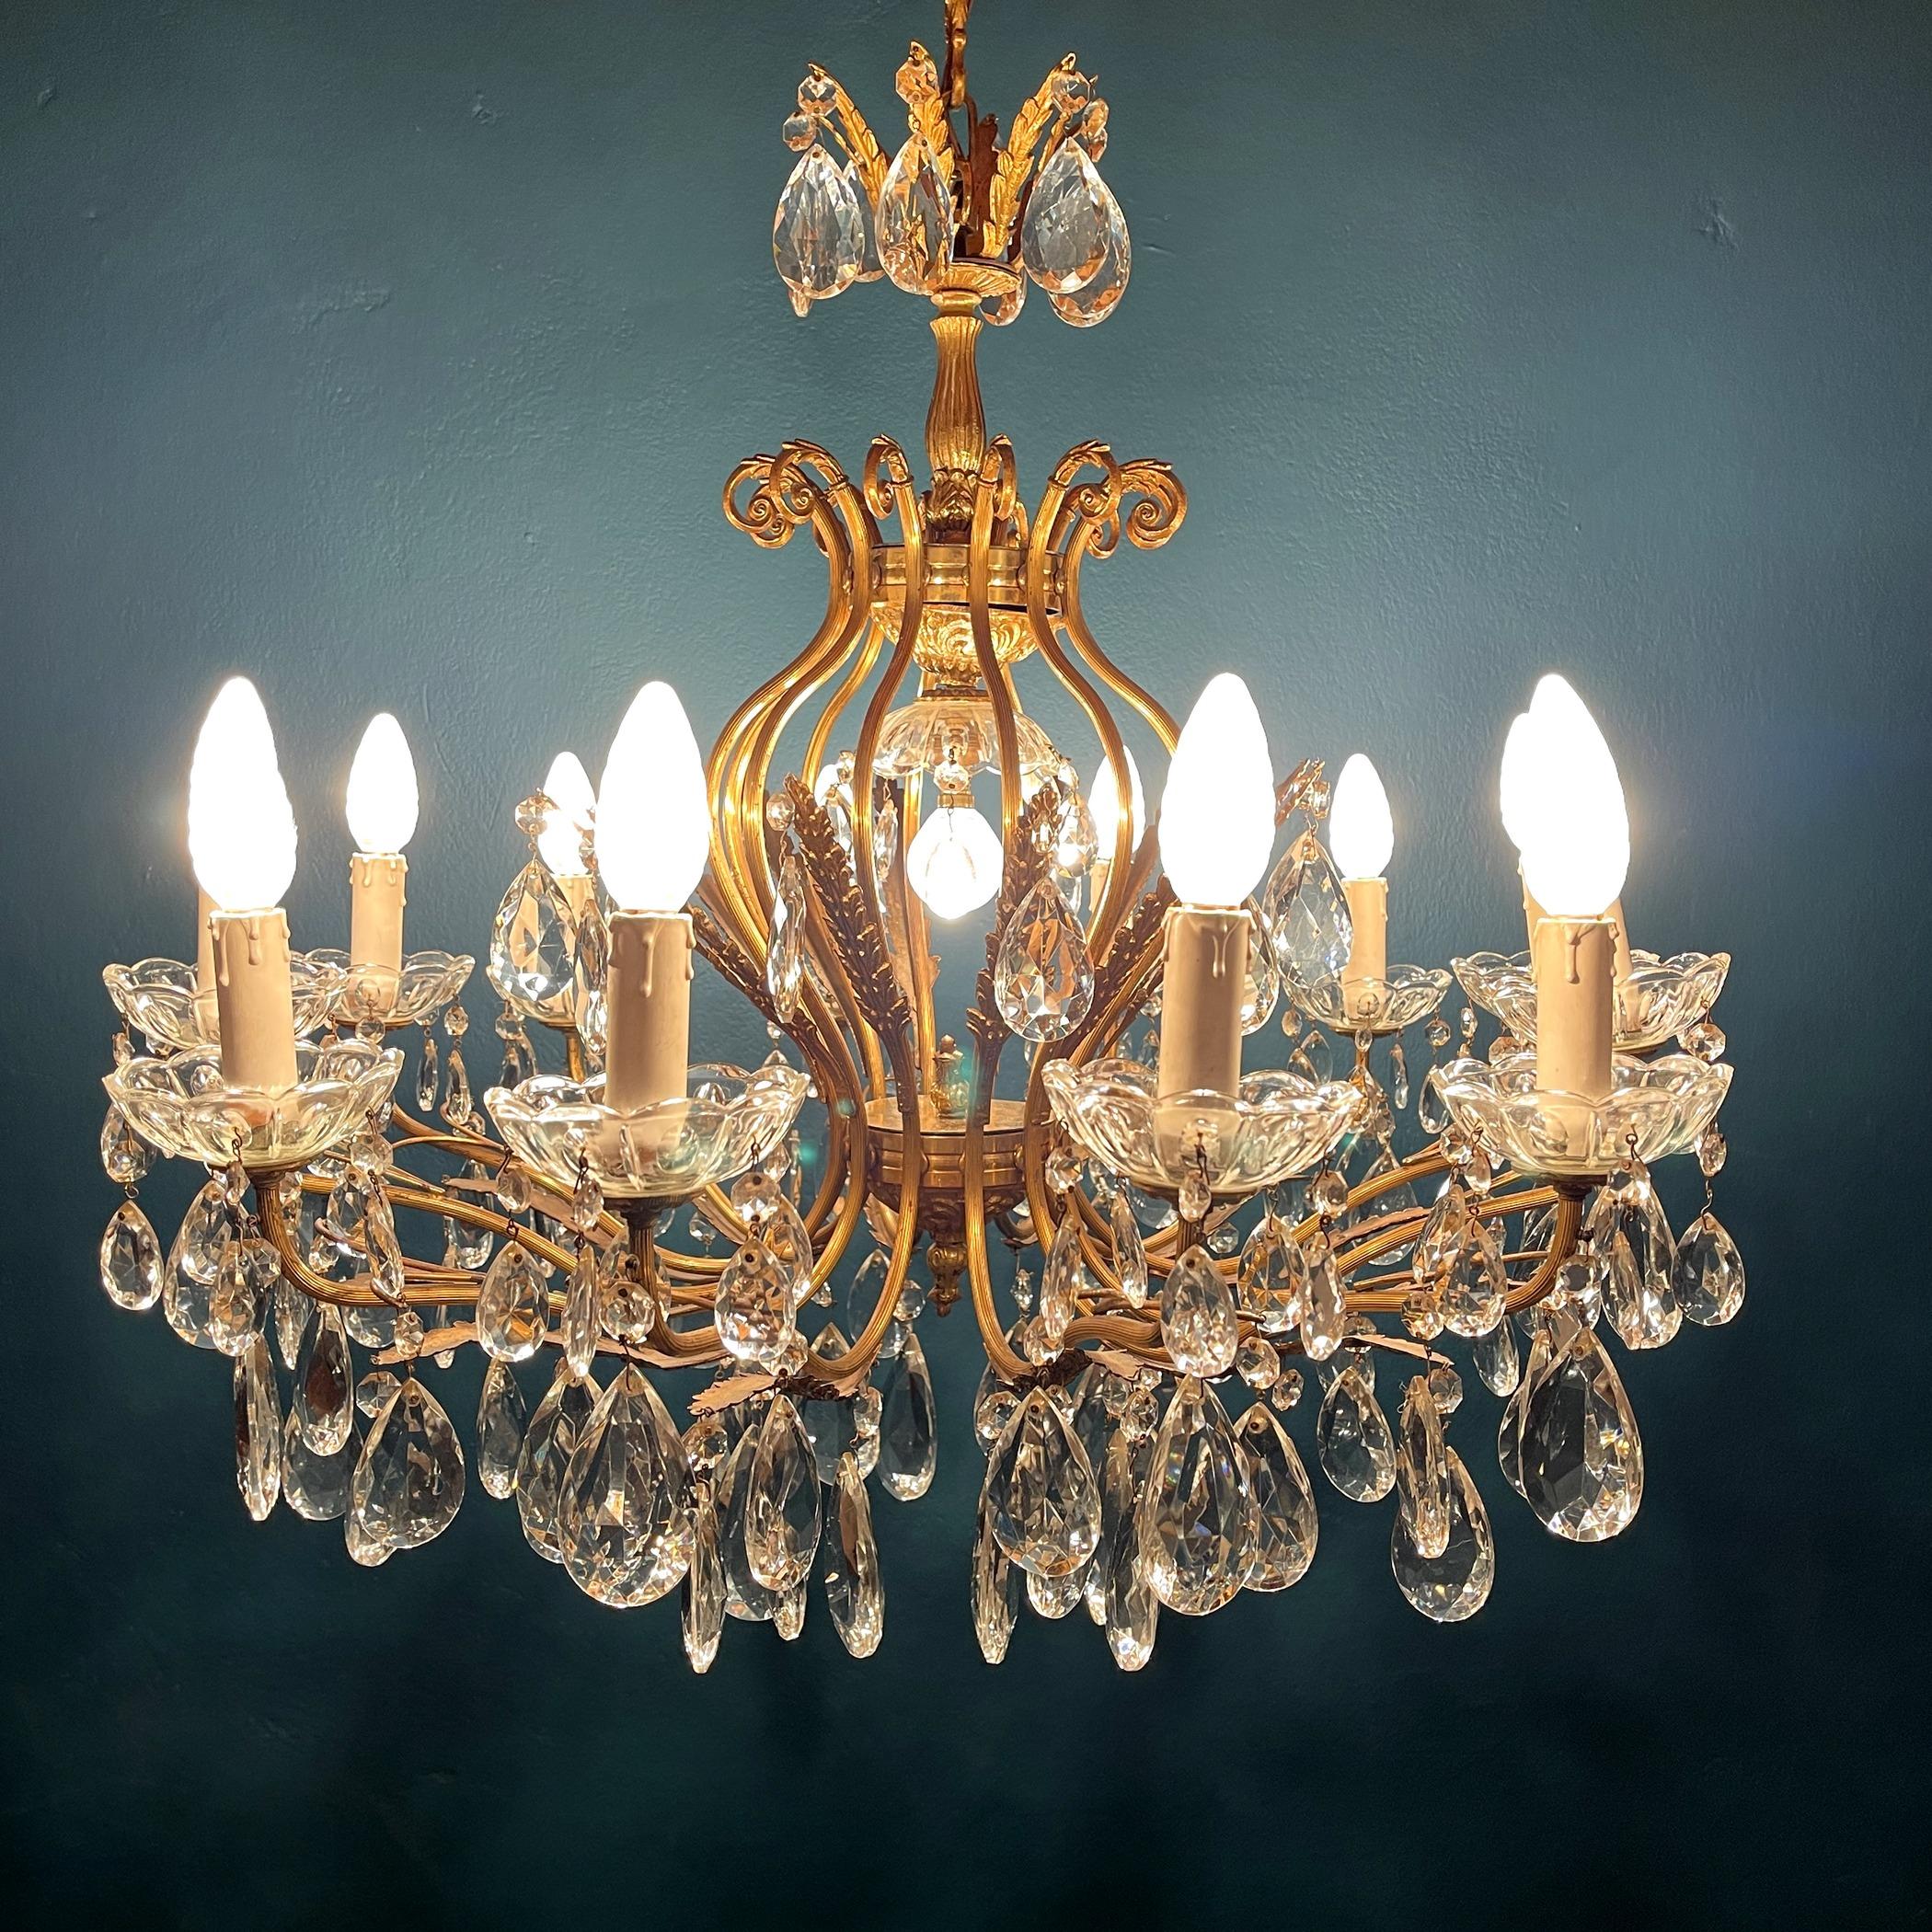 Rare vintage large crystal chandelier made in Italy in the 1950s. The chandelier has 12 solid bronze arms that takes 12 small screw fit light bulb sockets. Electrical wiring checked and replaced by a professional electrician. The chandelier is